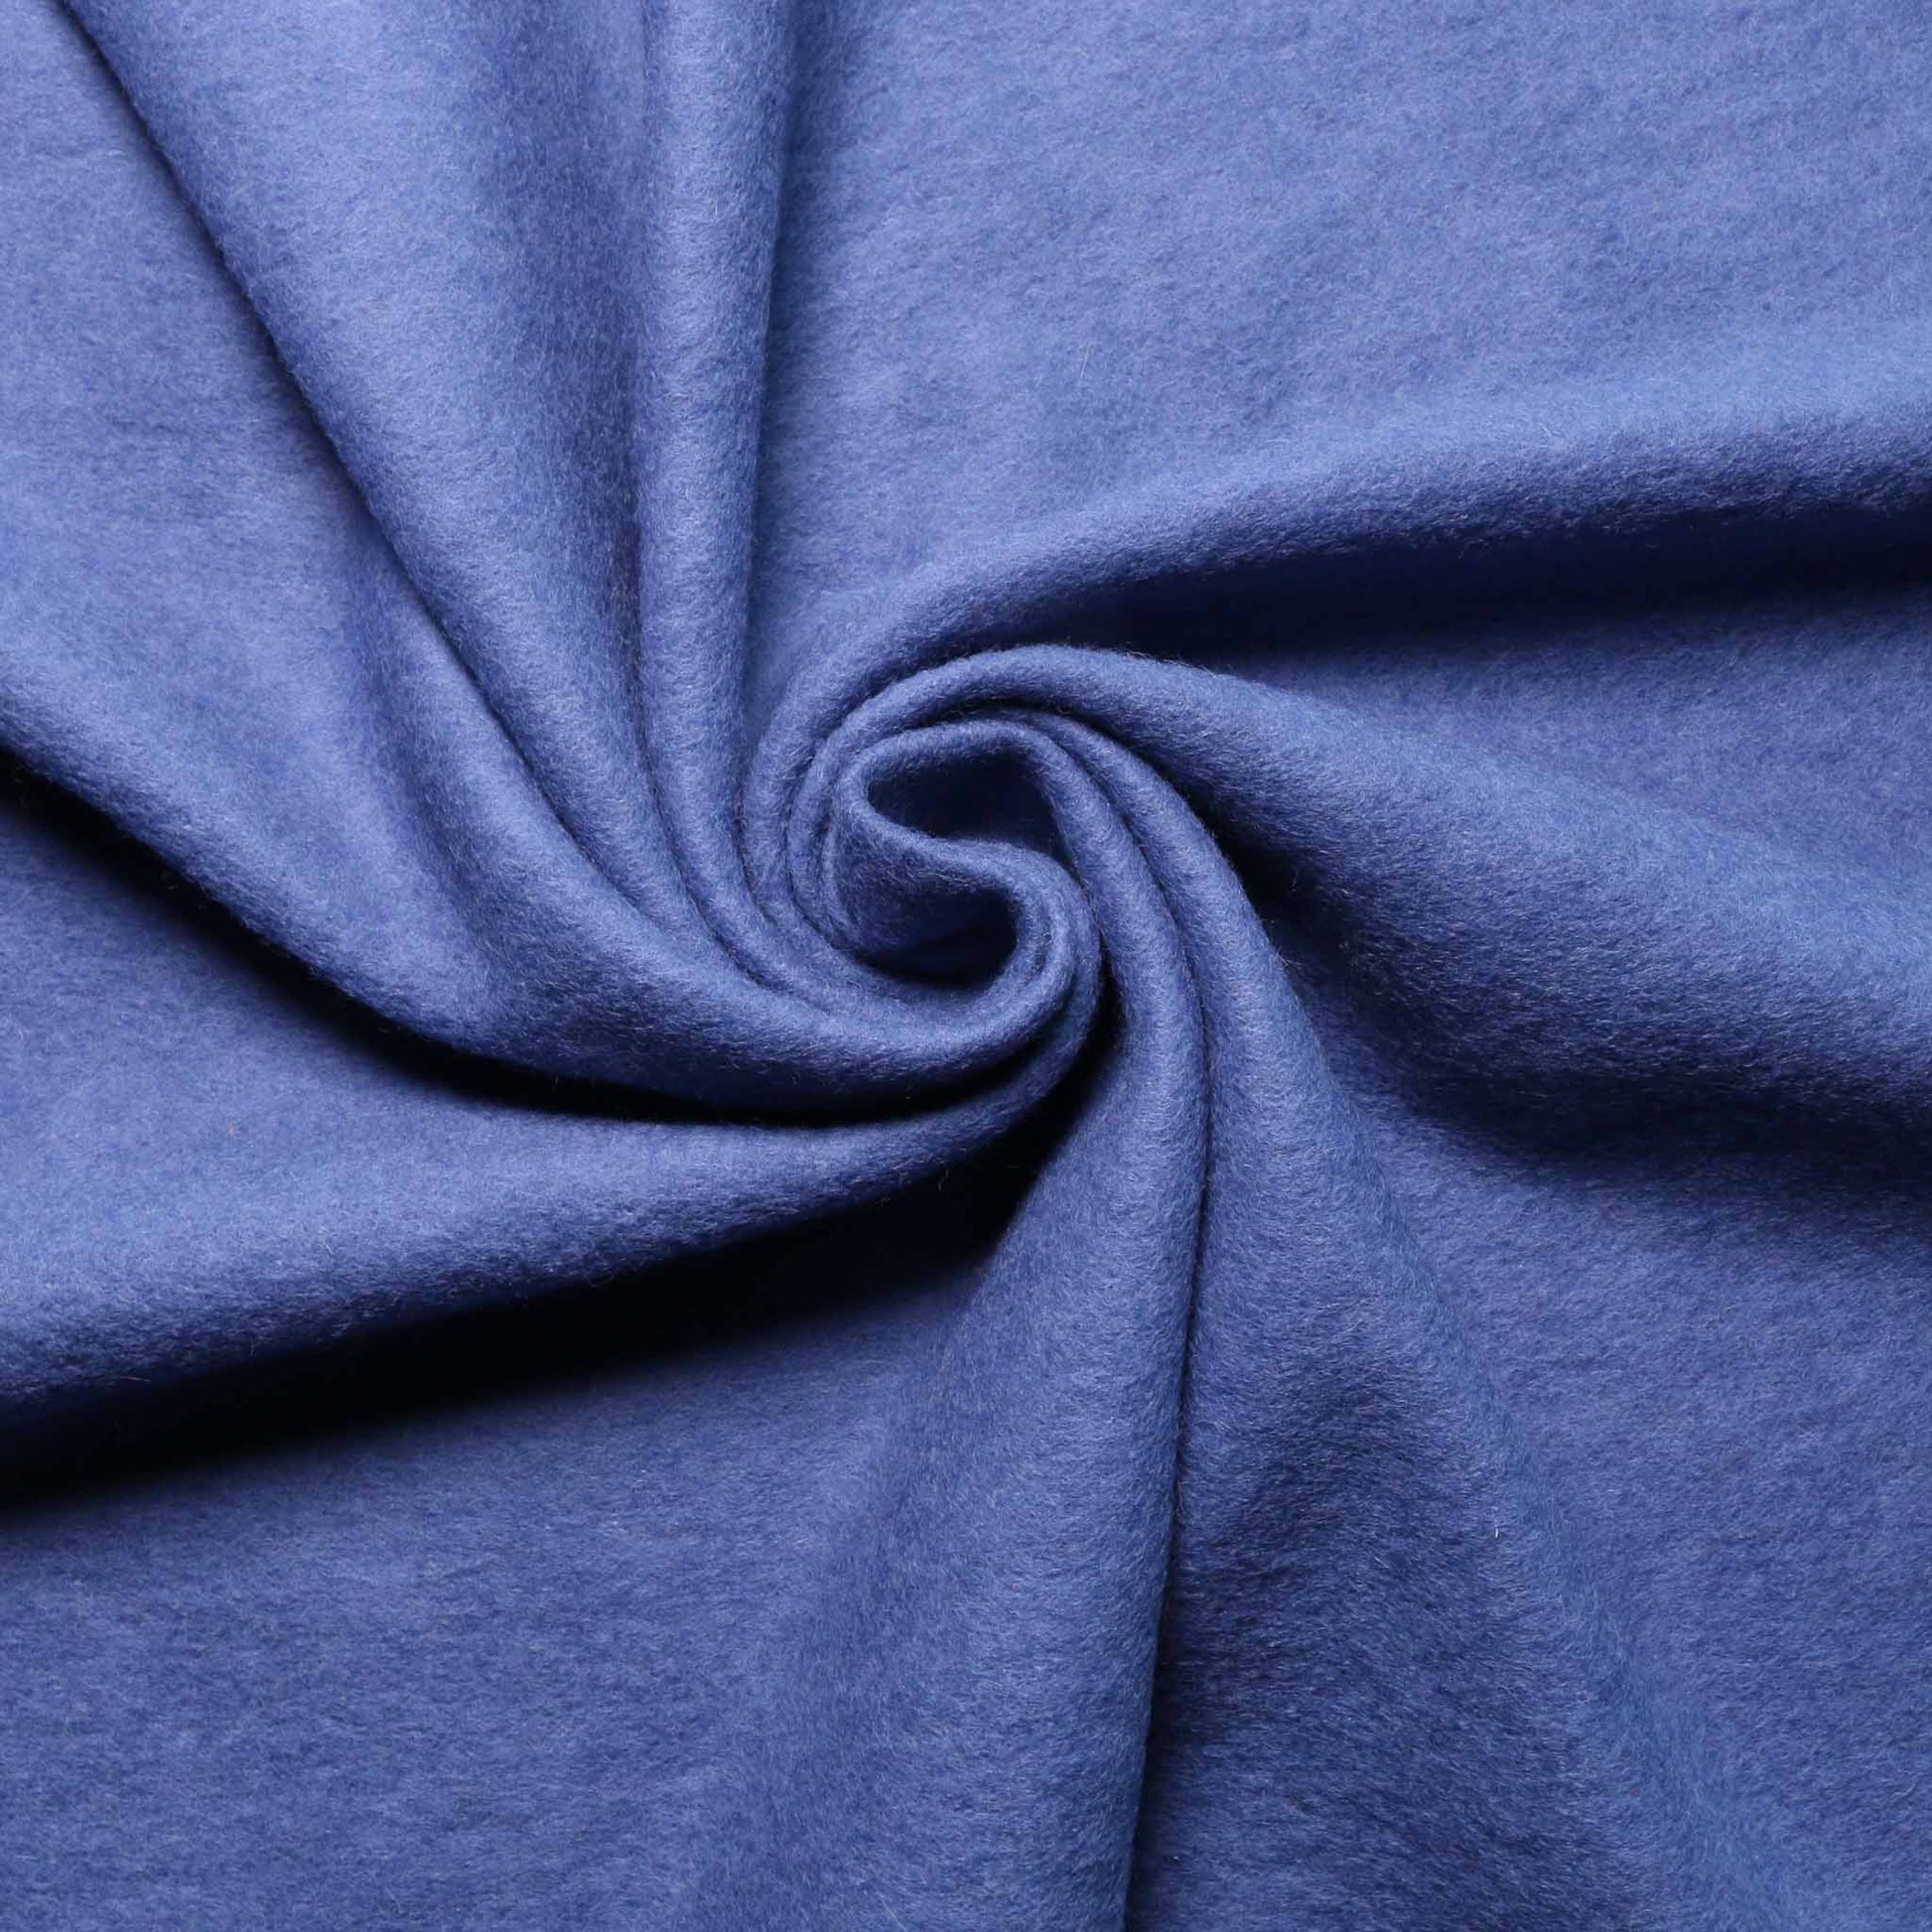 wool jersey flannel fabric for dressmaking in plain blue colour